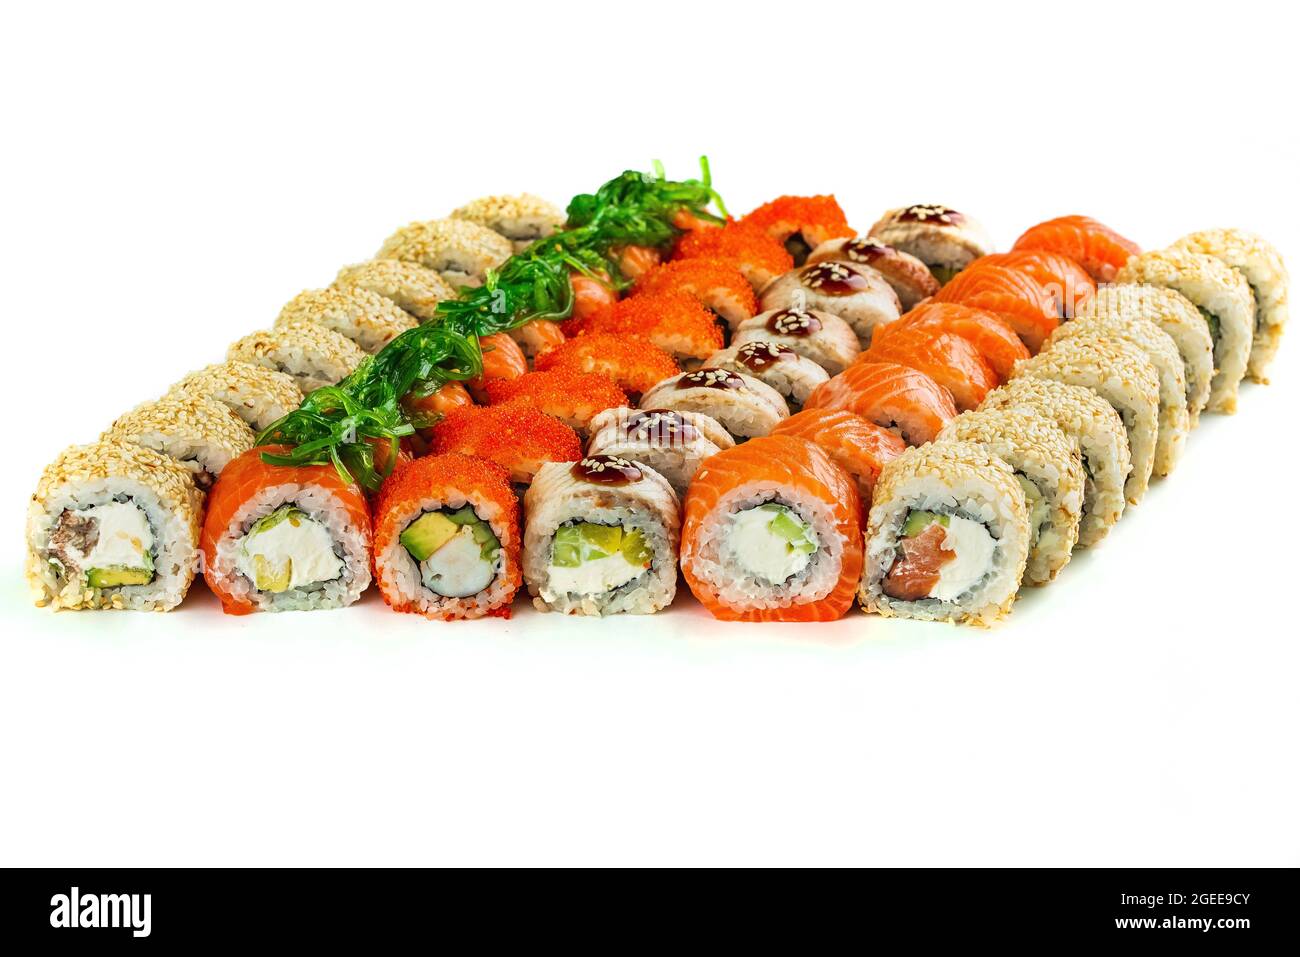 https://c8.alamy.com/comp/2GEE9CY/japanese-sushi-set-with-rolls-california-and-philadelphia-2GEE9CY.jpg